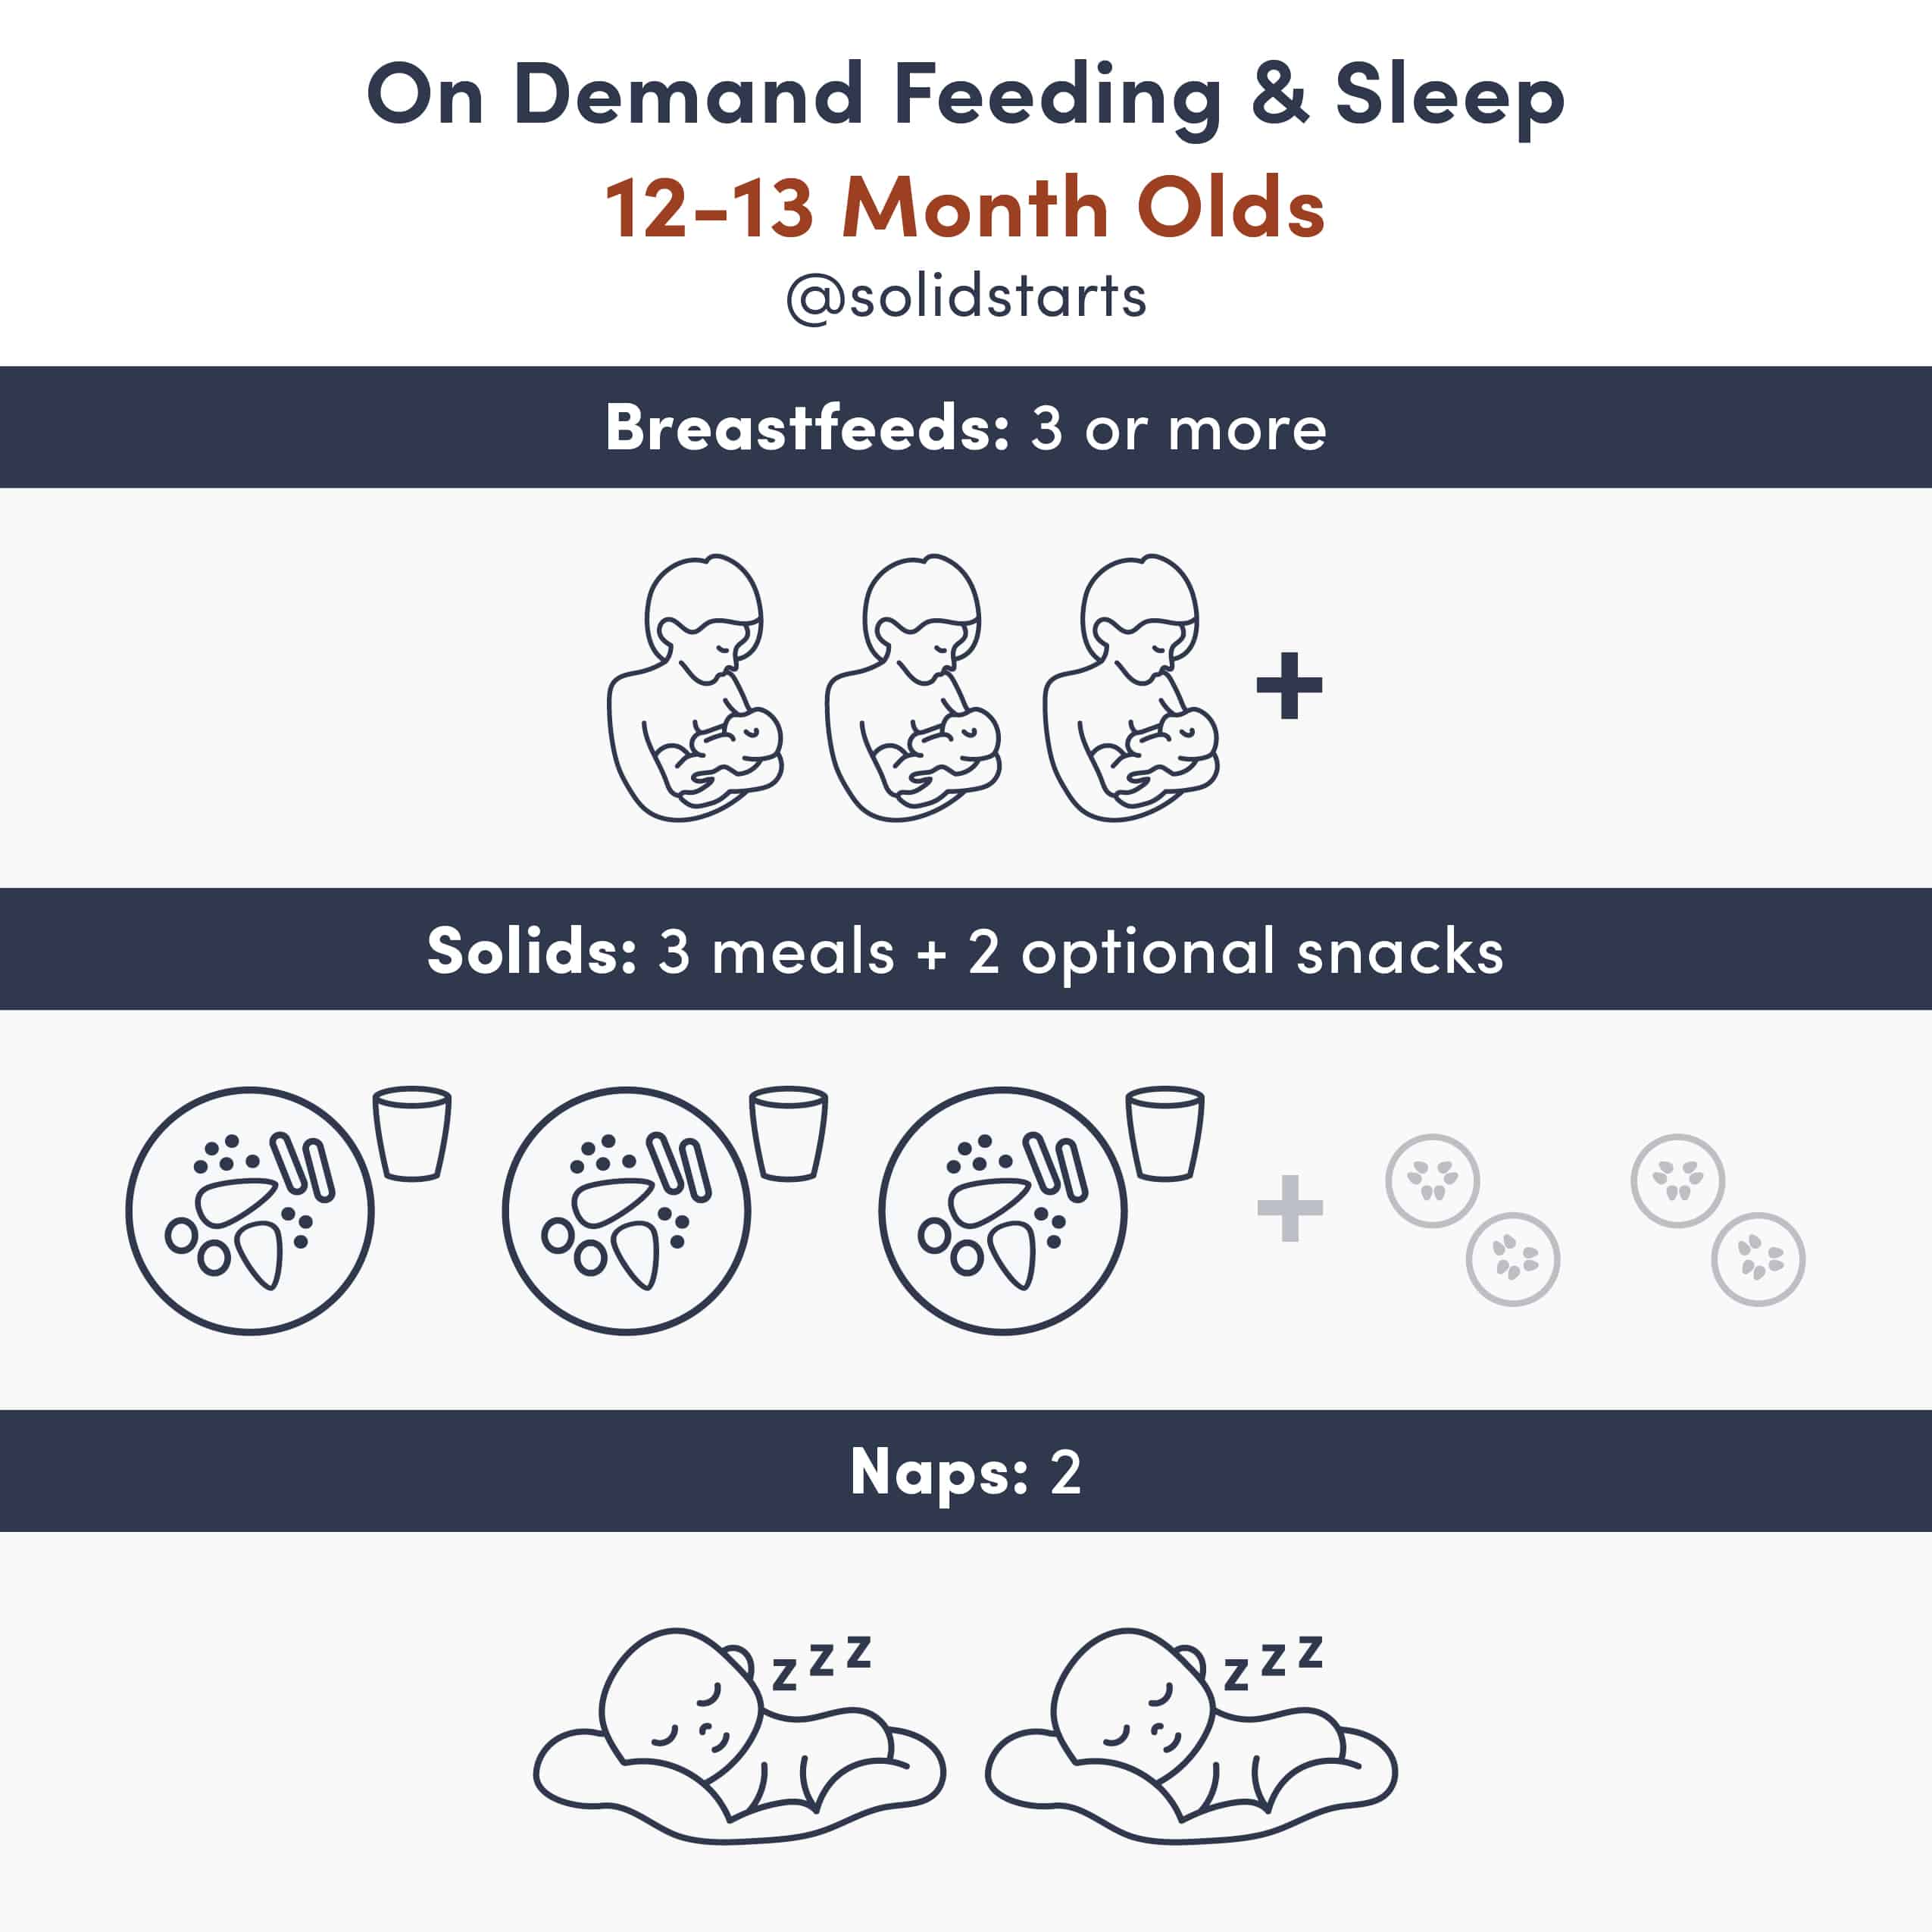 Amount and Schedule of Baby Formula Feedings 